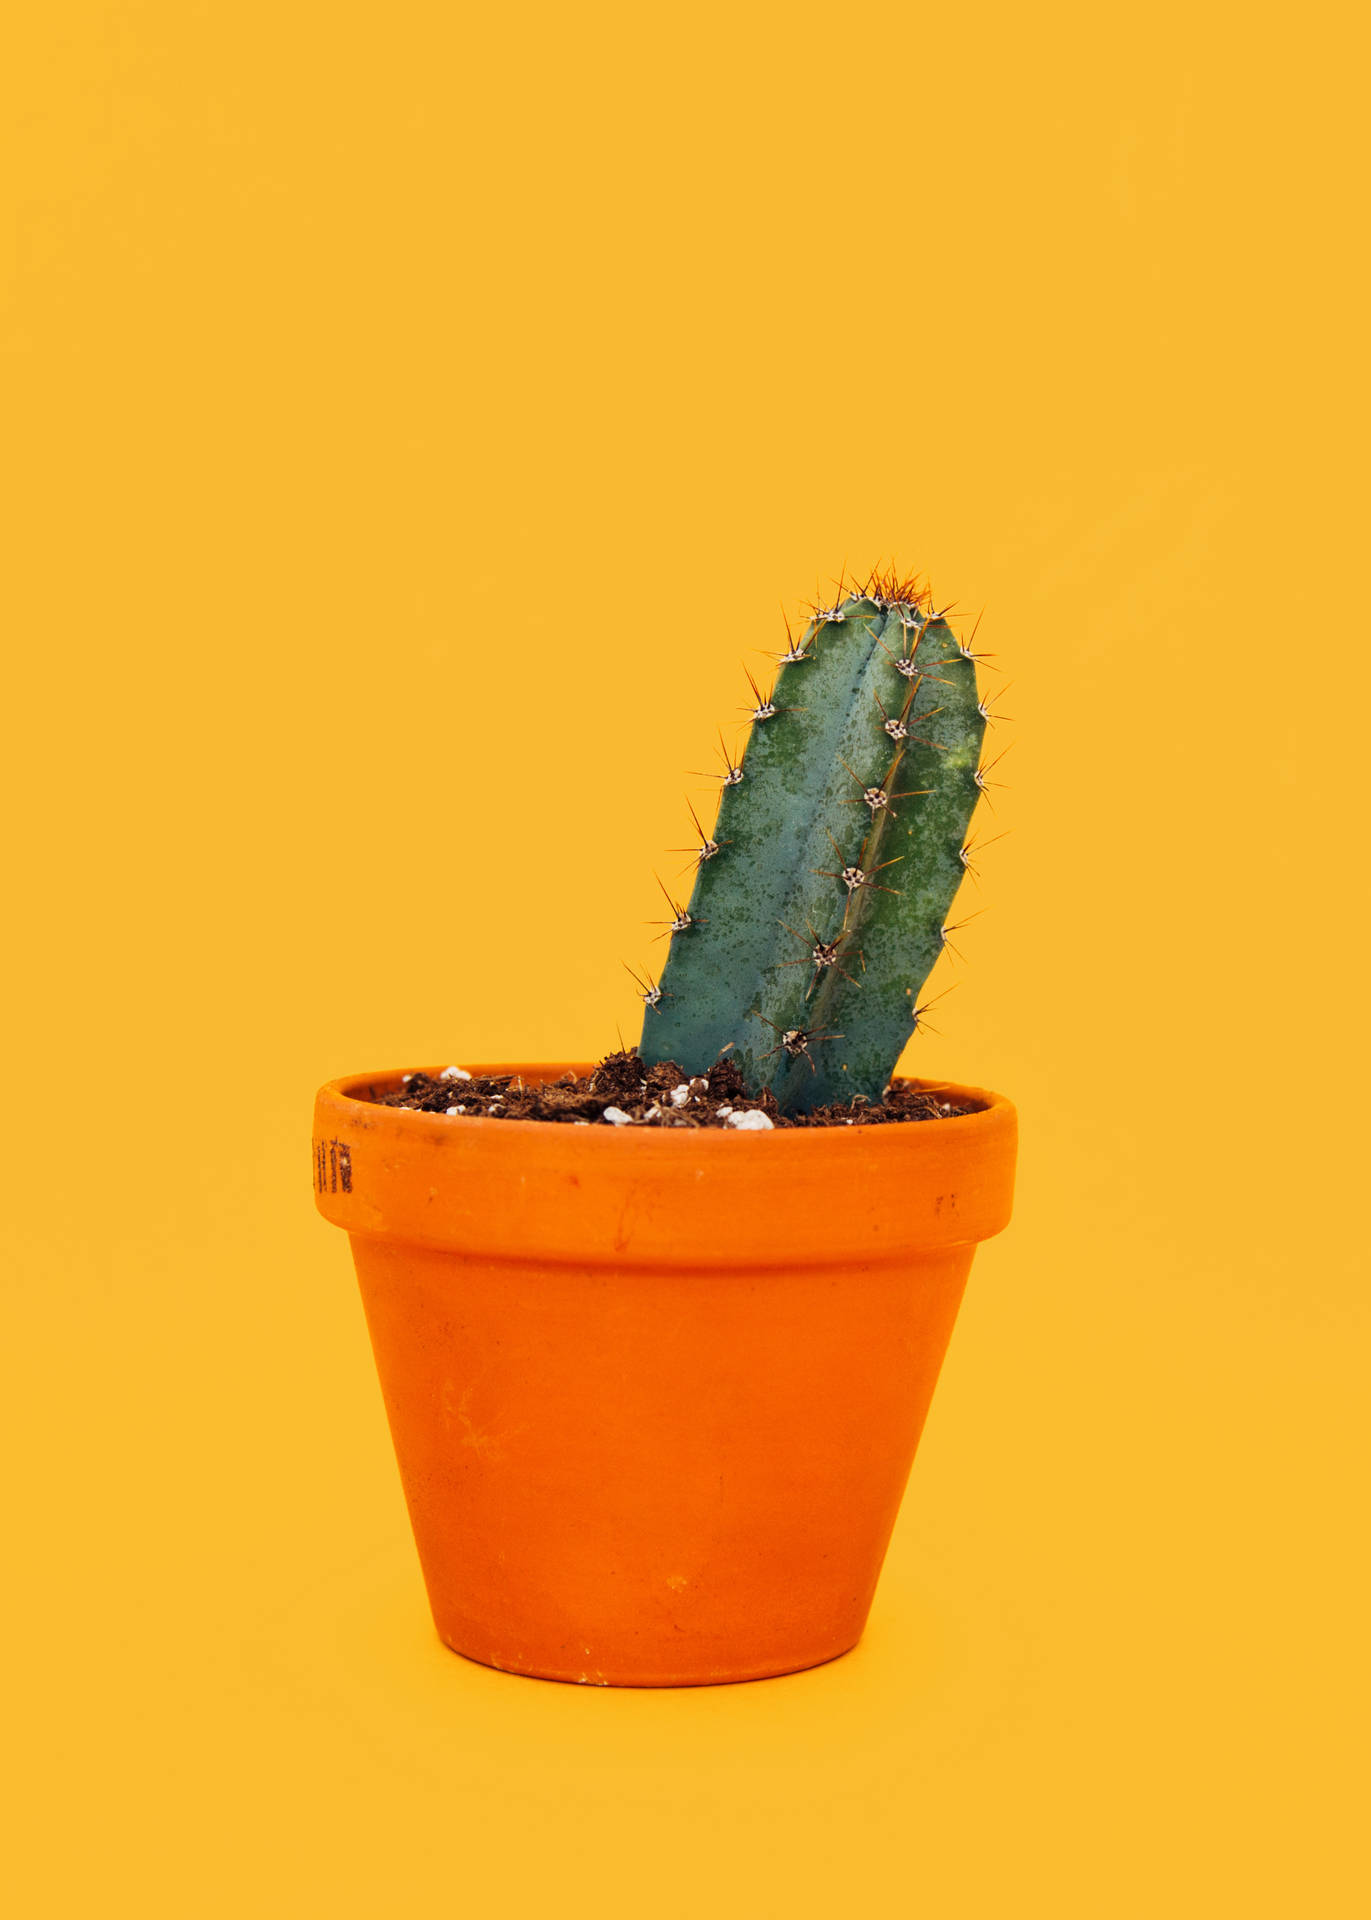 2605X3648 Cactus Wallpaper and Background